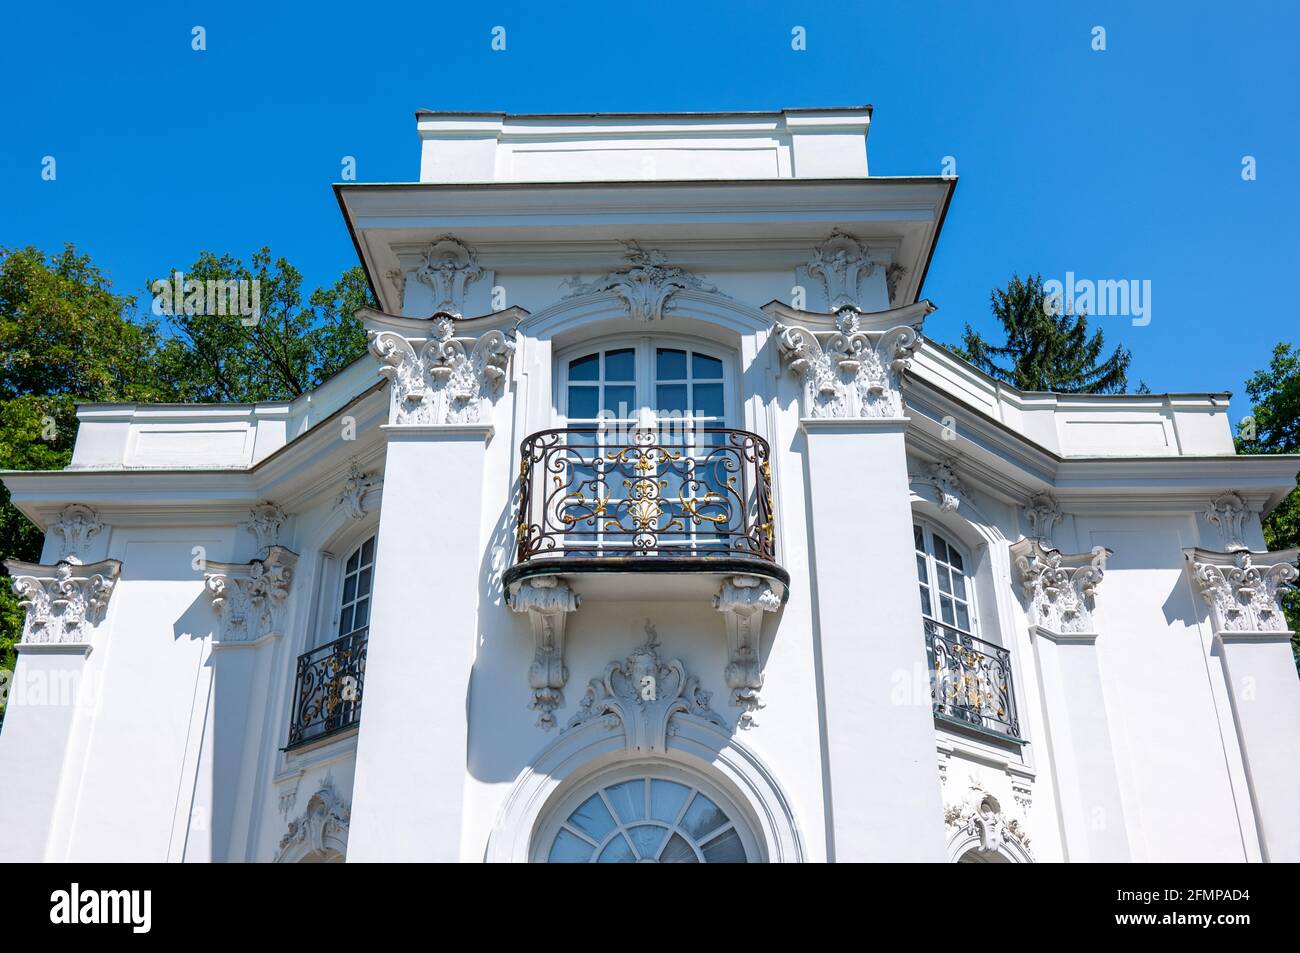 Munich. Germany, The Pagodenburg pavilion in the Nymphenburg Park Stock Photo